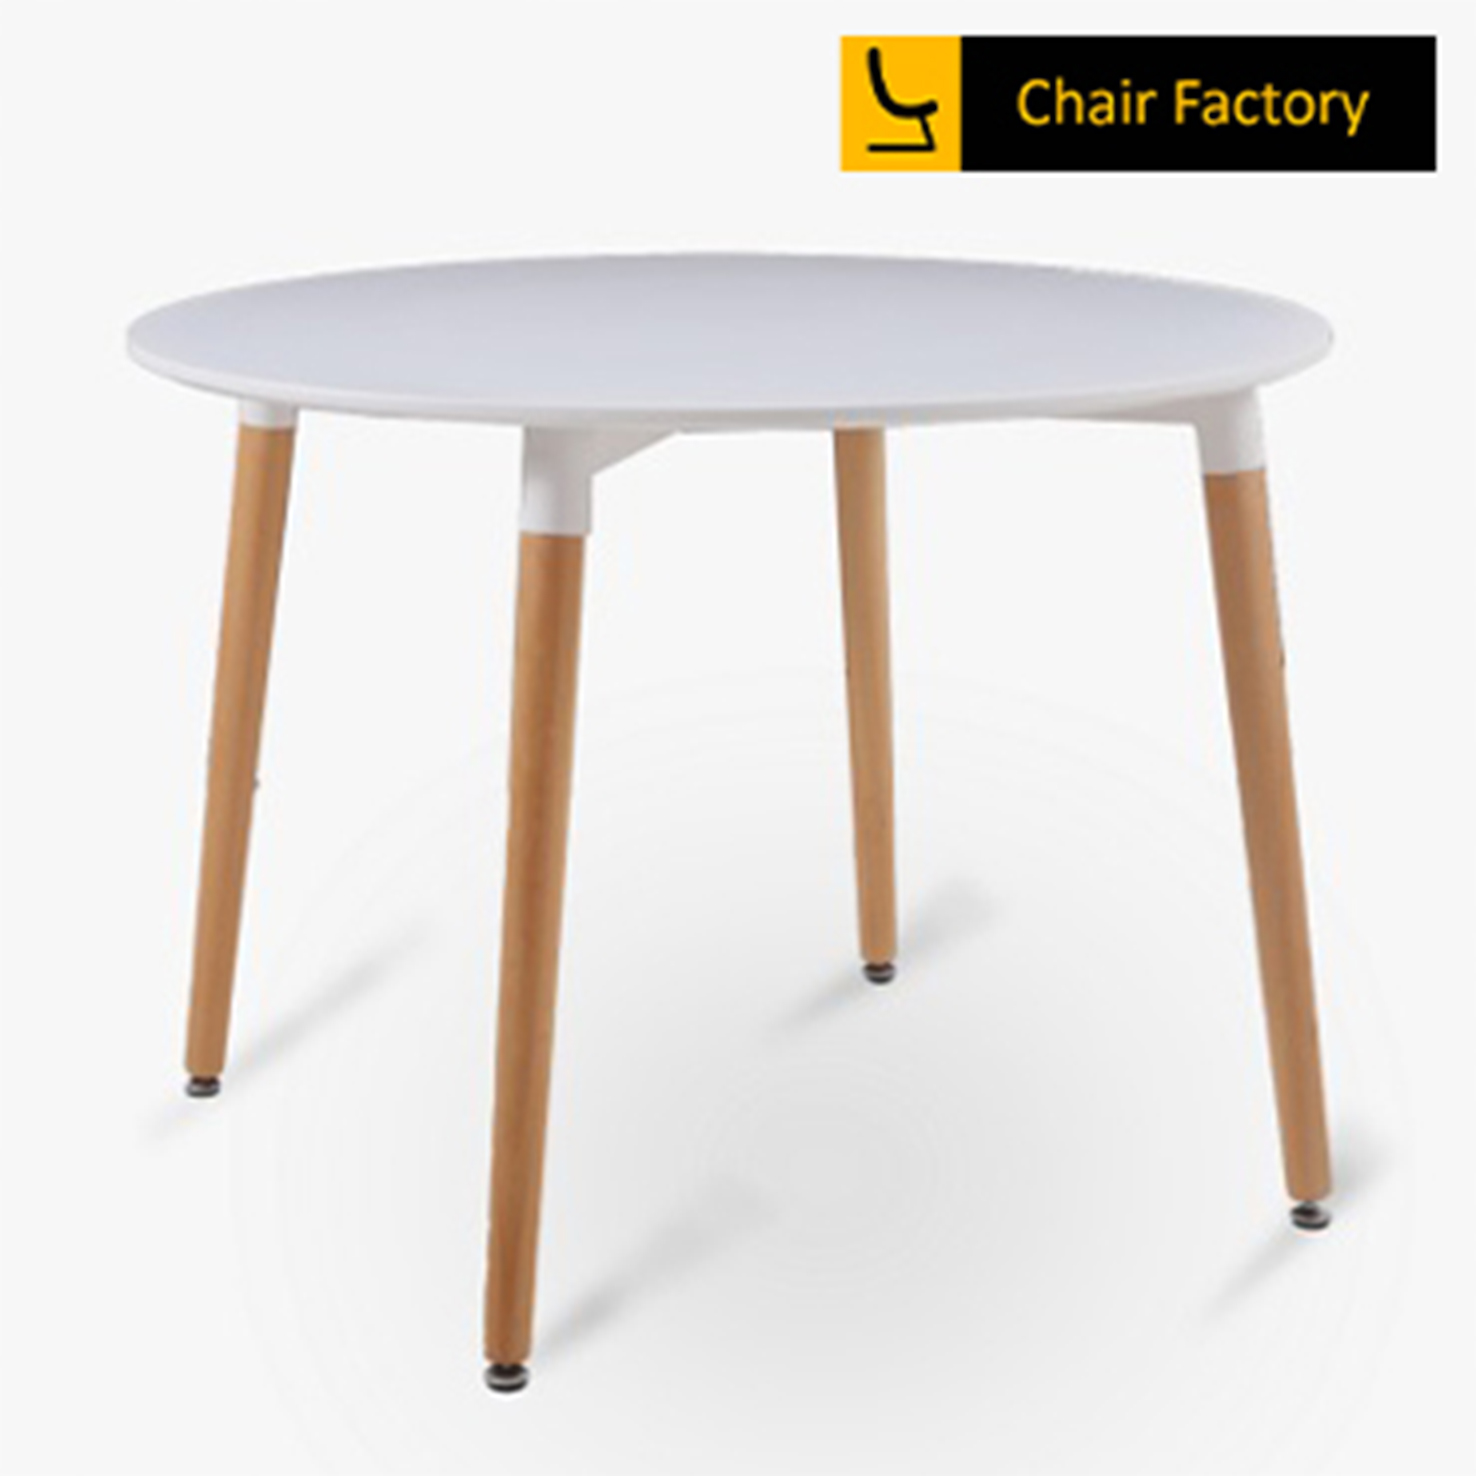 Ritchie Big Round Cafe Table